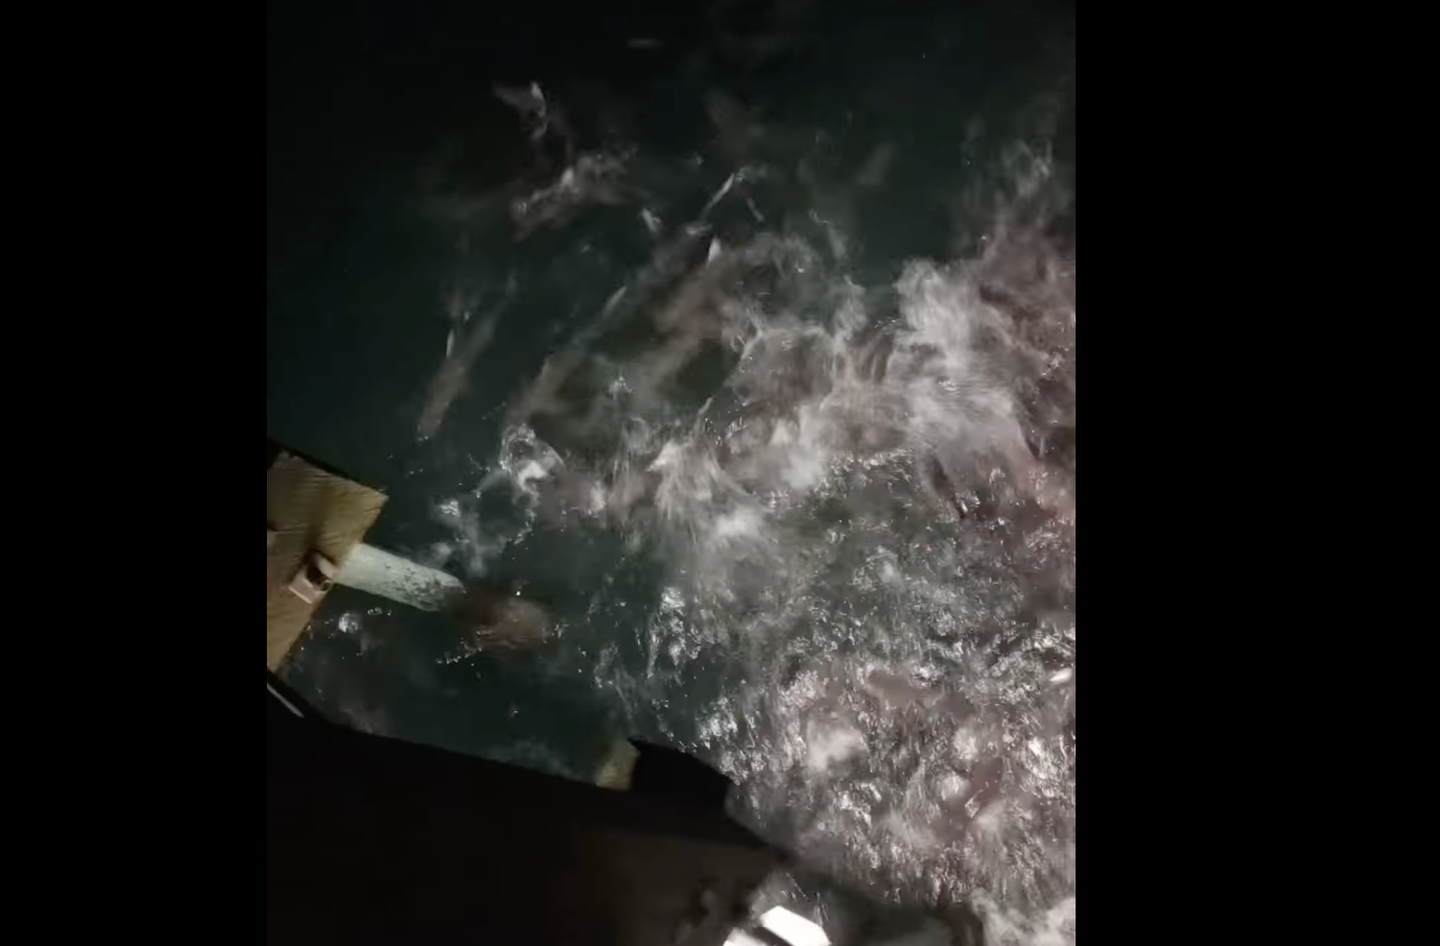 many sharks thrash the surface of the water at night next to pier